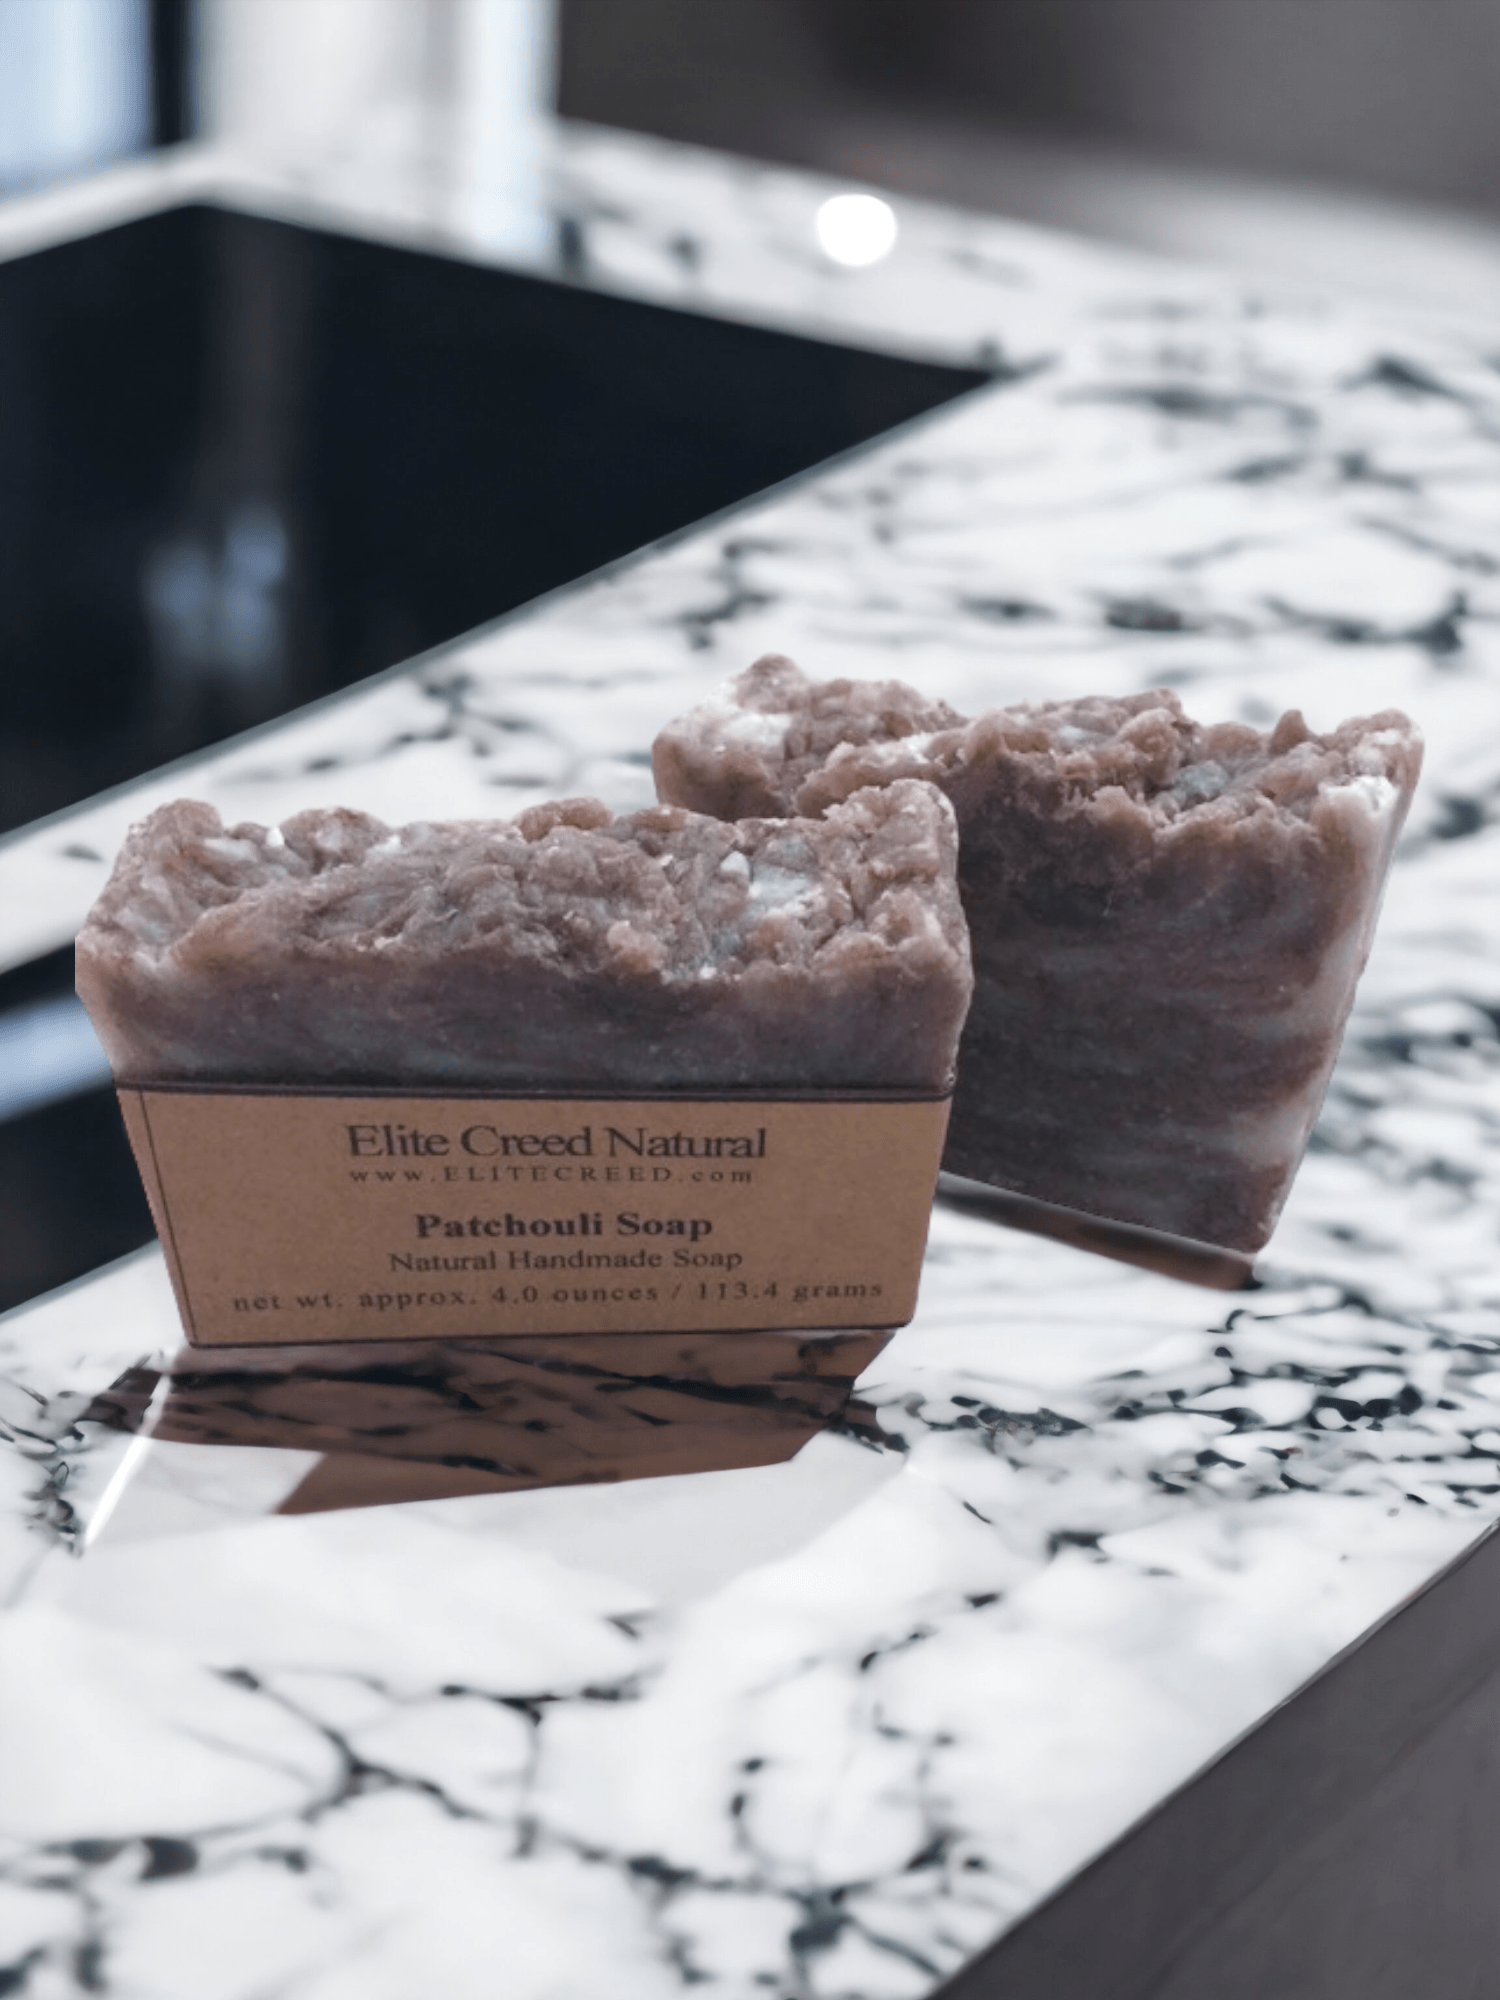 Patchouli Handmade Soap - Elite Creed Natural